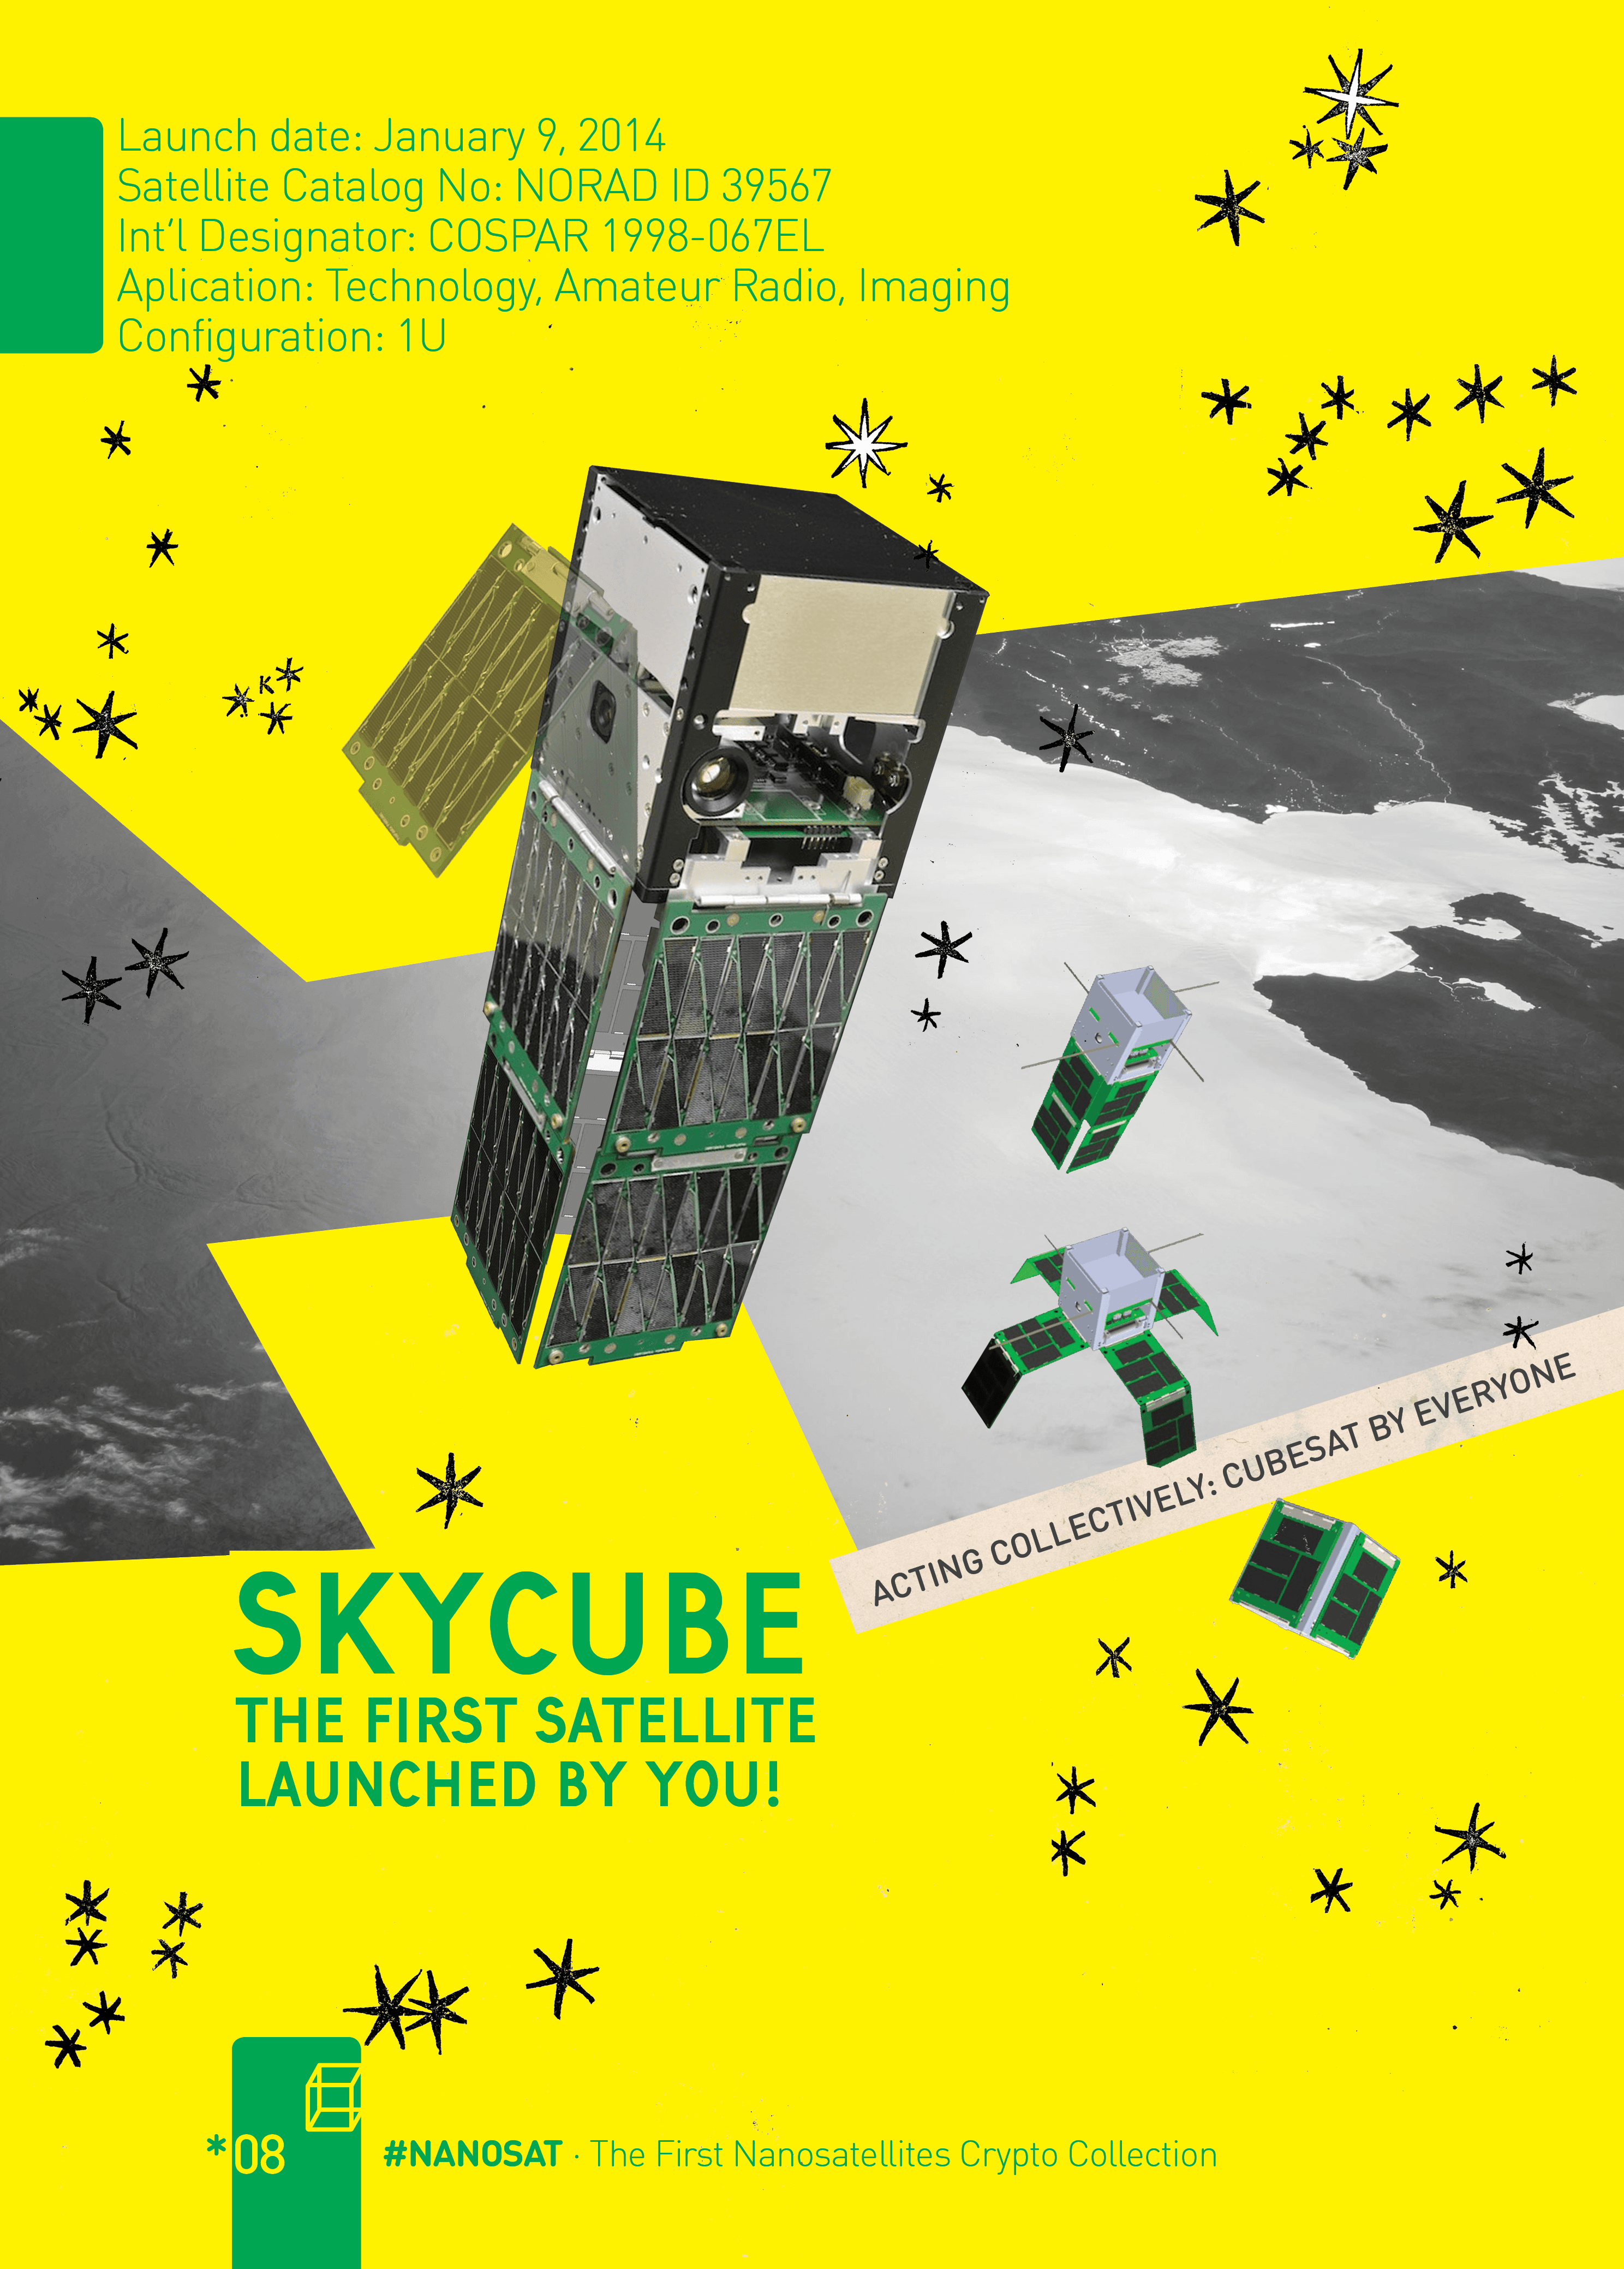 SKYCUBE “The First Satellite Launched by You!”